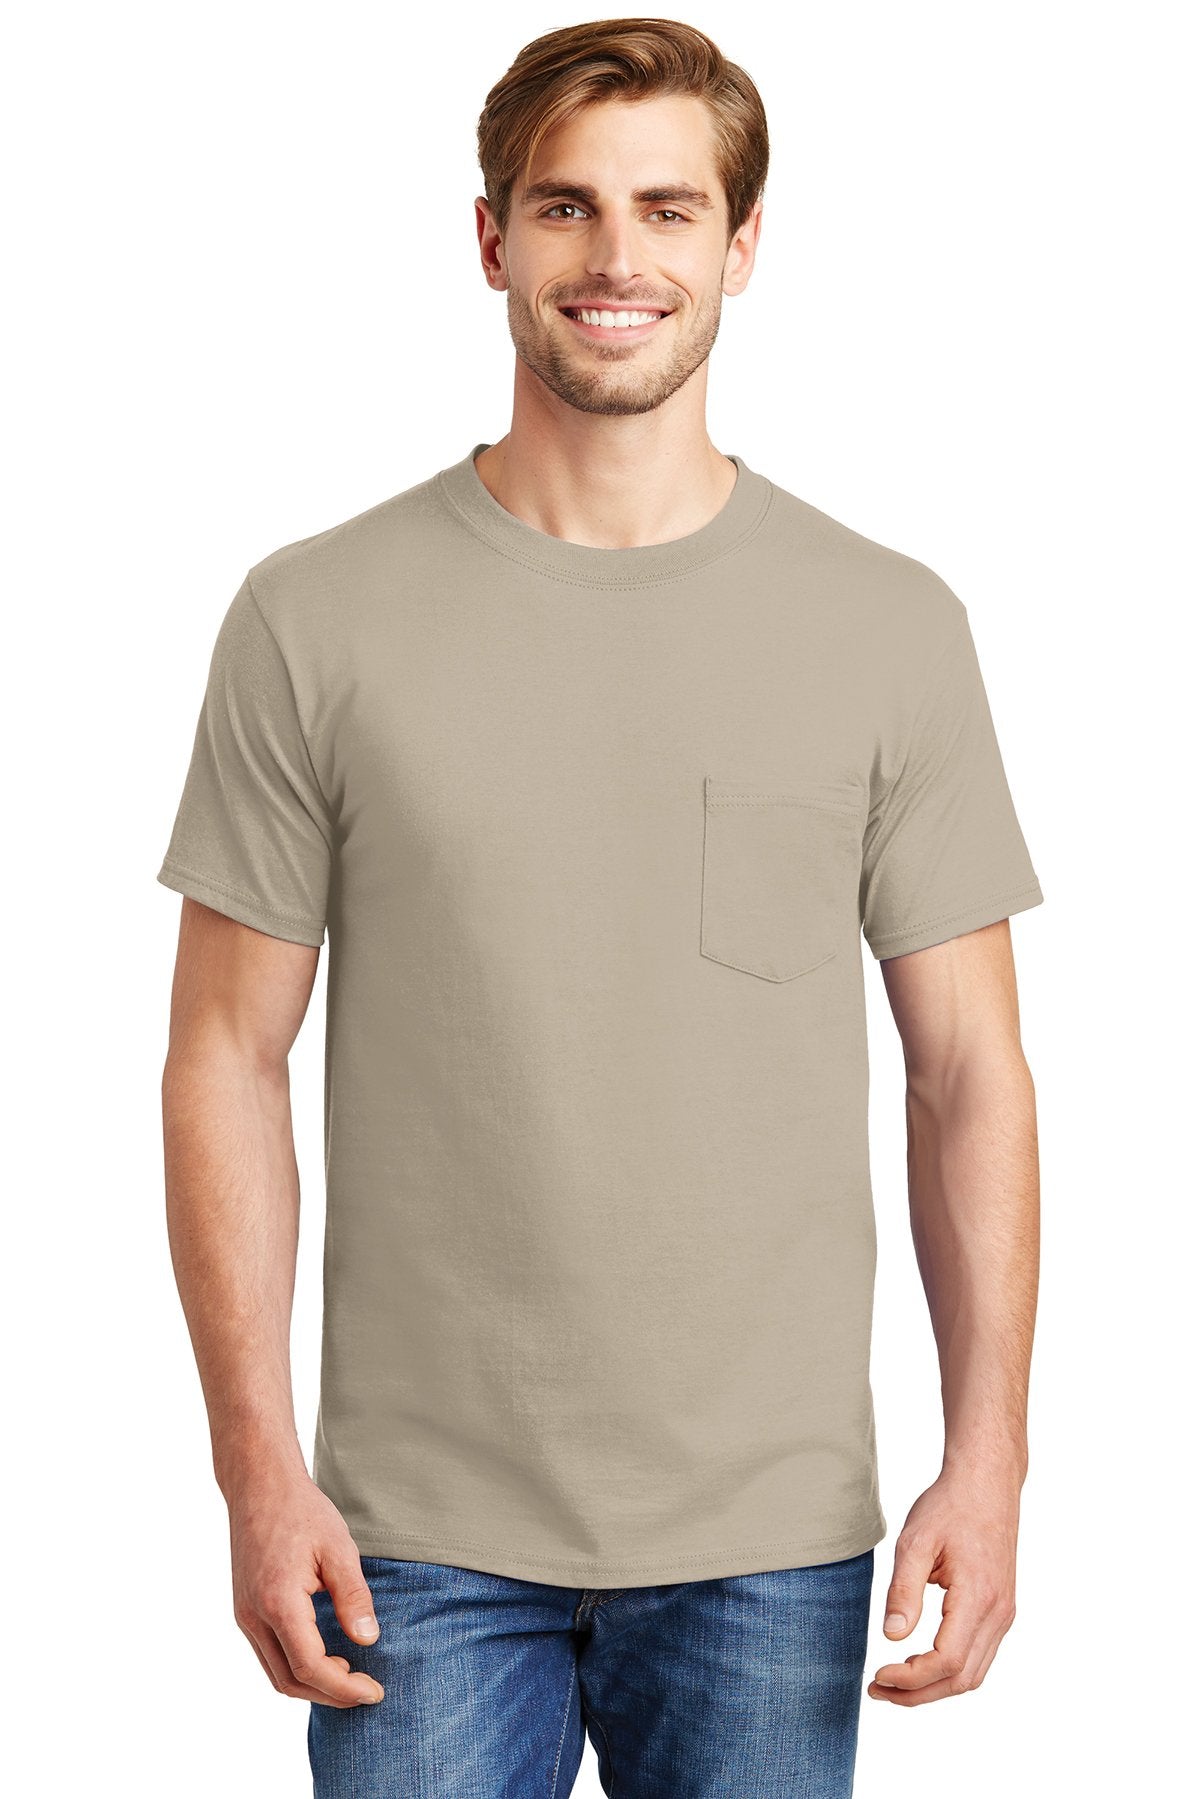 hanes beefy cotton t shirt with pocket 5190 sand